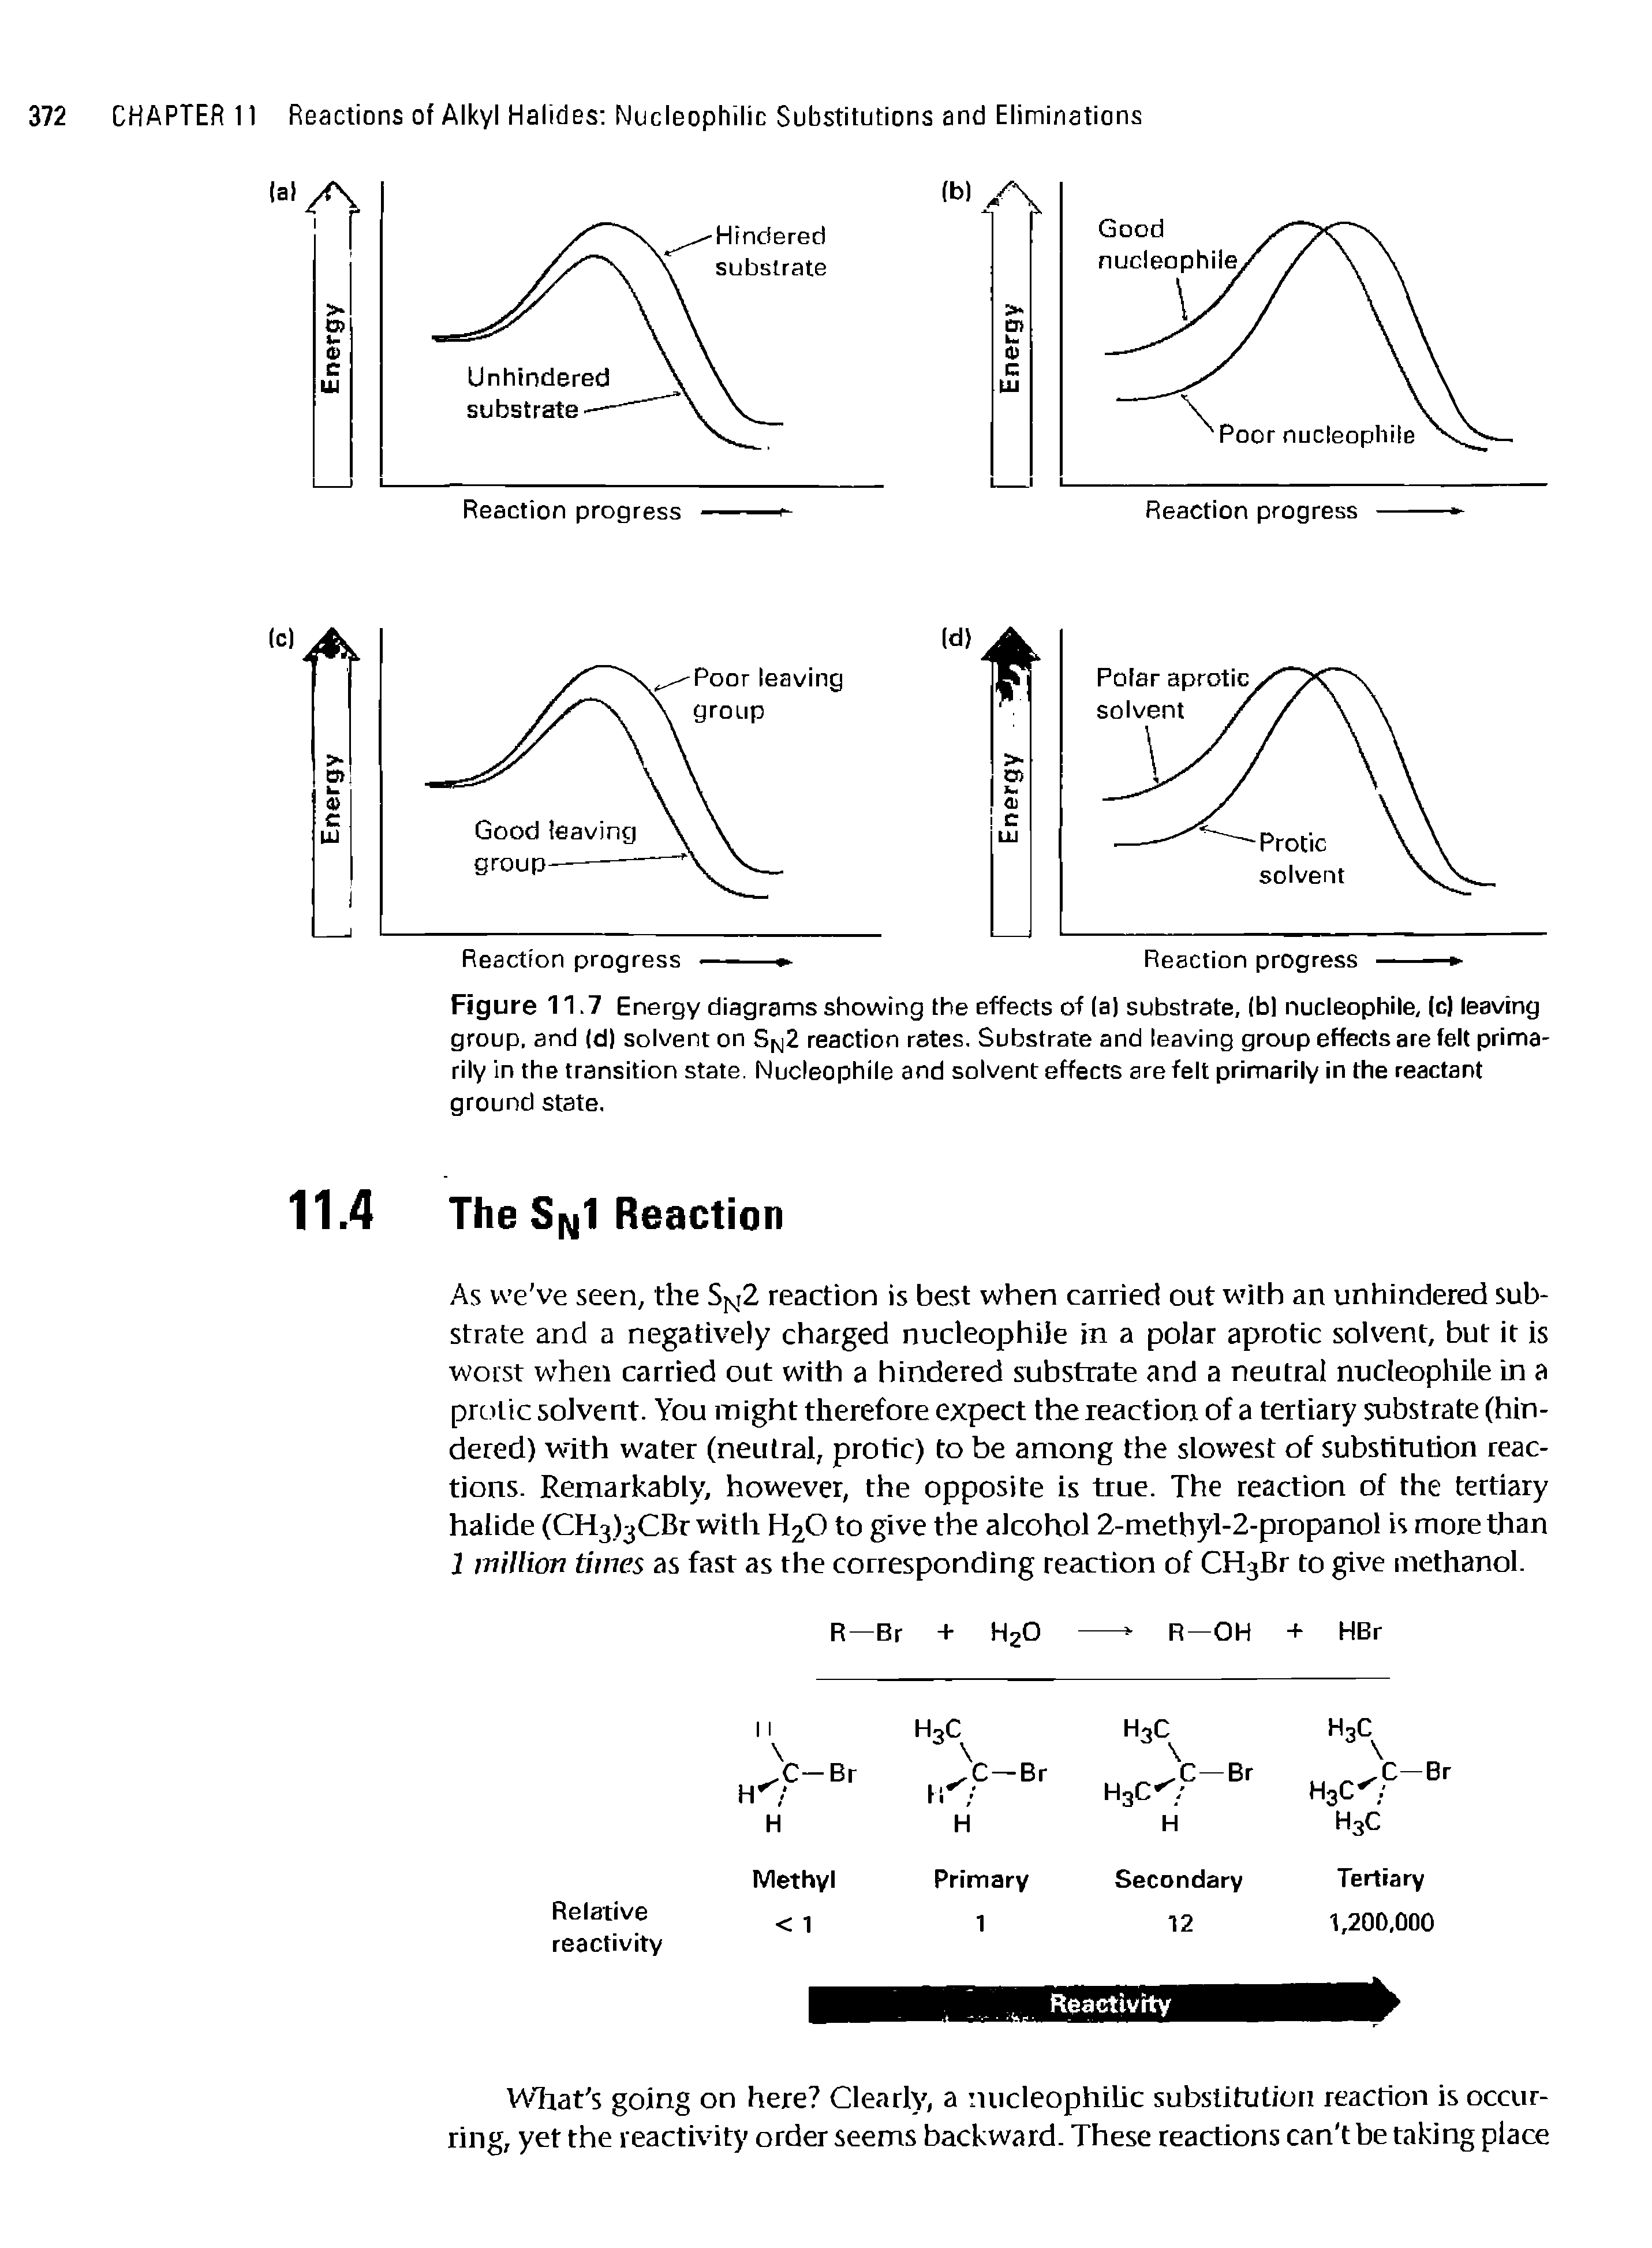 Figure 11.7 Energy diagrams showing the effects of (a) substrate, (b) nucleophile, (c) leaving group, and (d) solvent on Sn2 reaction rates. Substrate and leaving group effects are felt primarily in the transition state. Nucleophile and solvent effects are felt primarily in the reactant ground state.